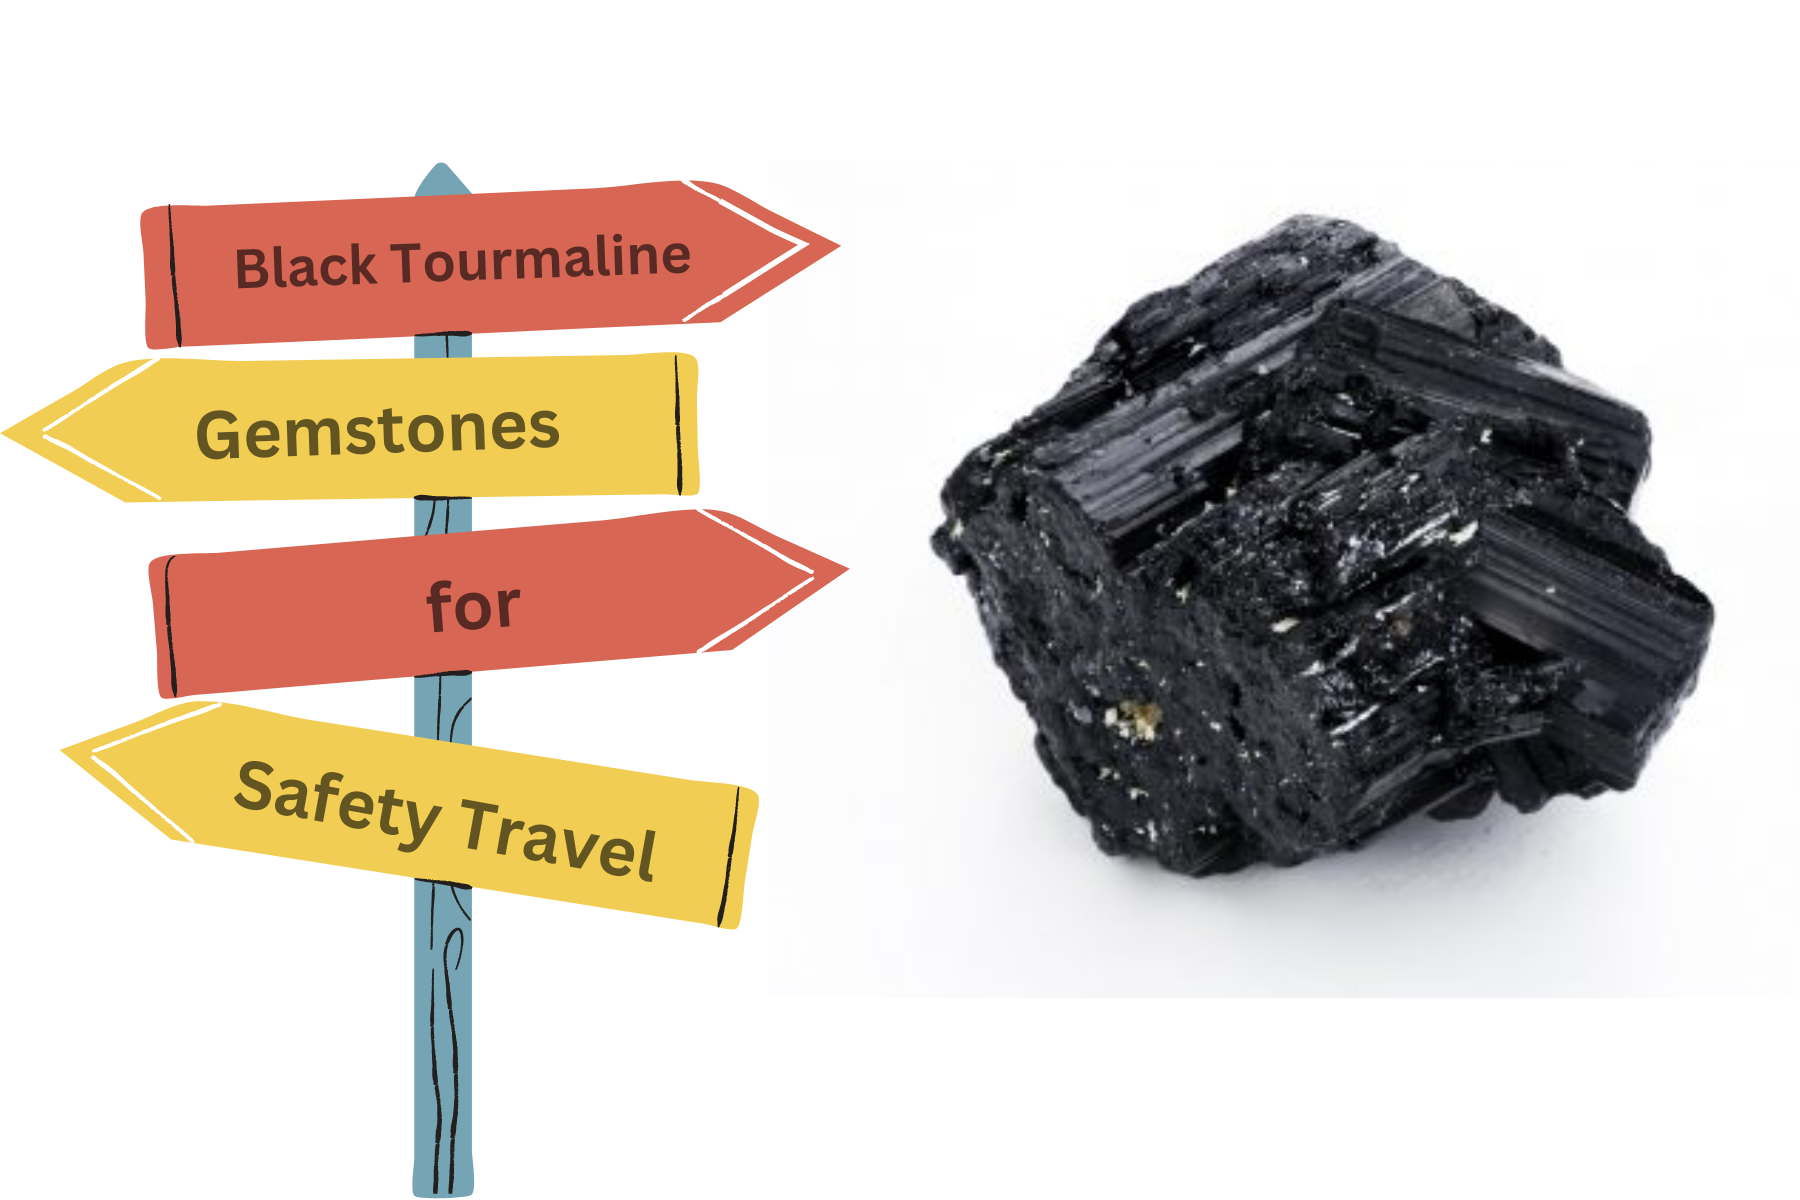 Black Tourmaline and wooden posts with the words "Black Tourmaline Gemstones for Safety Travel"